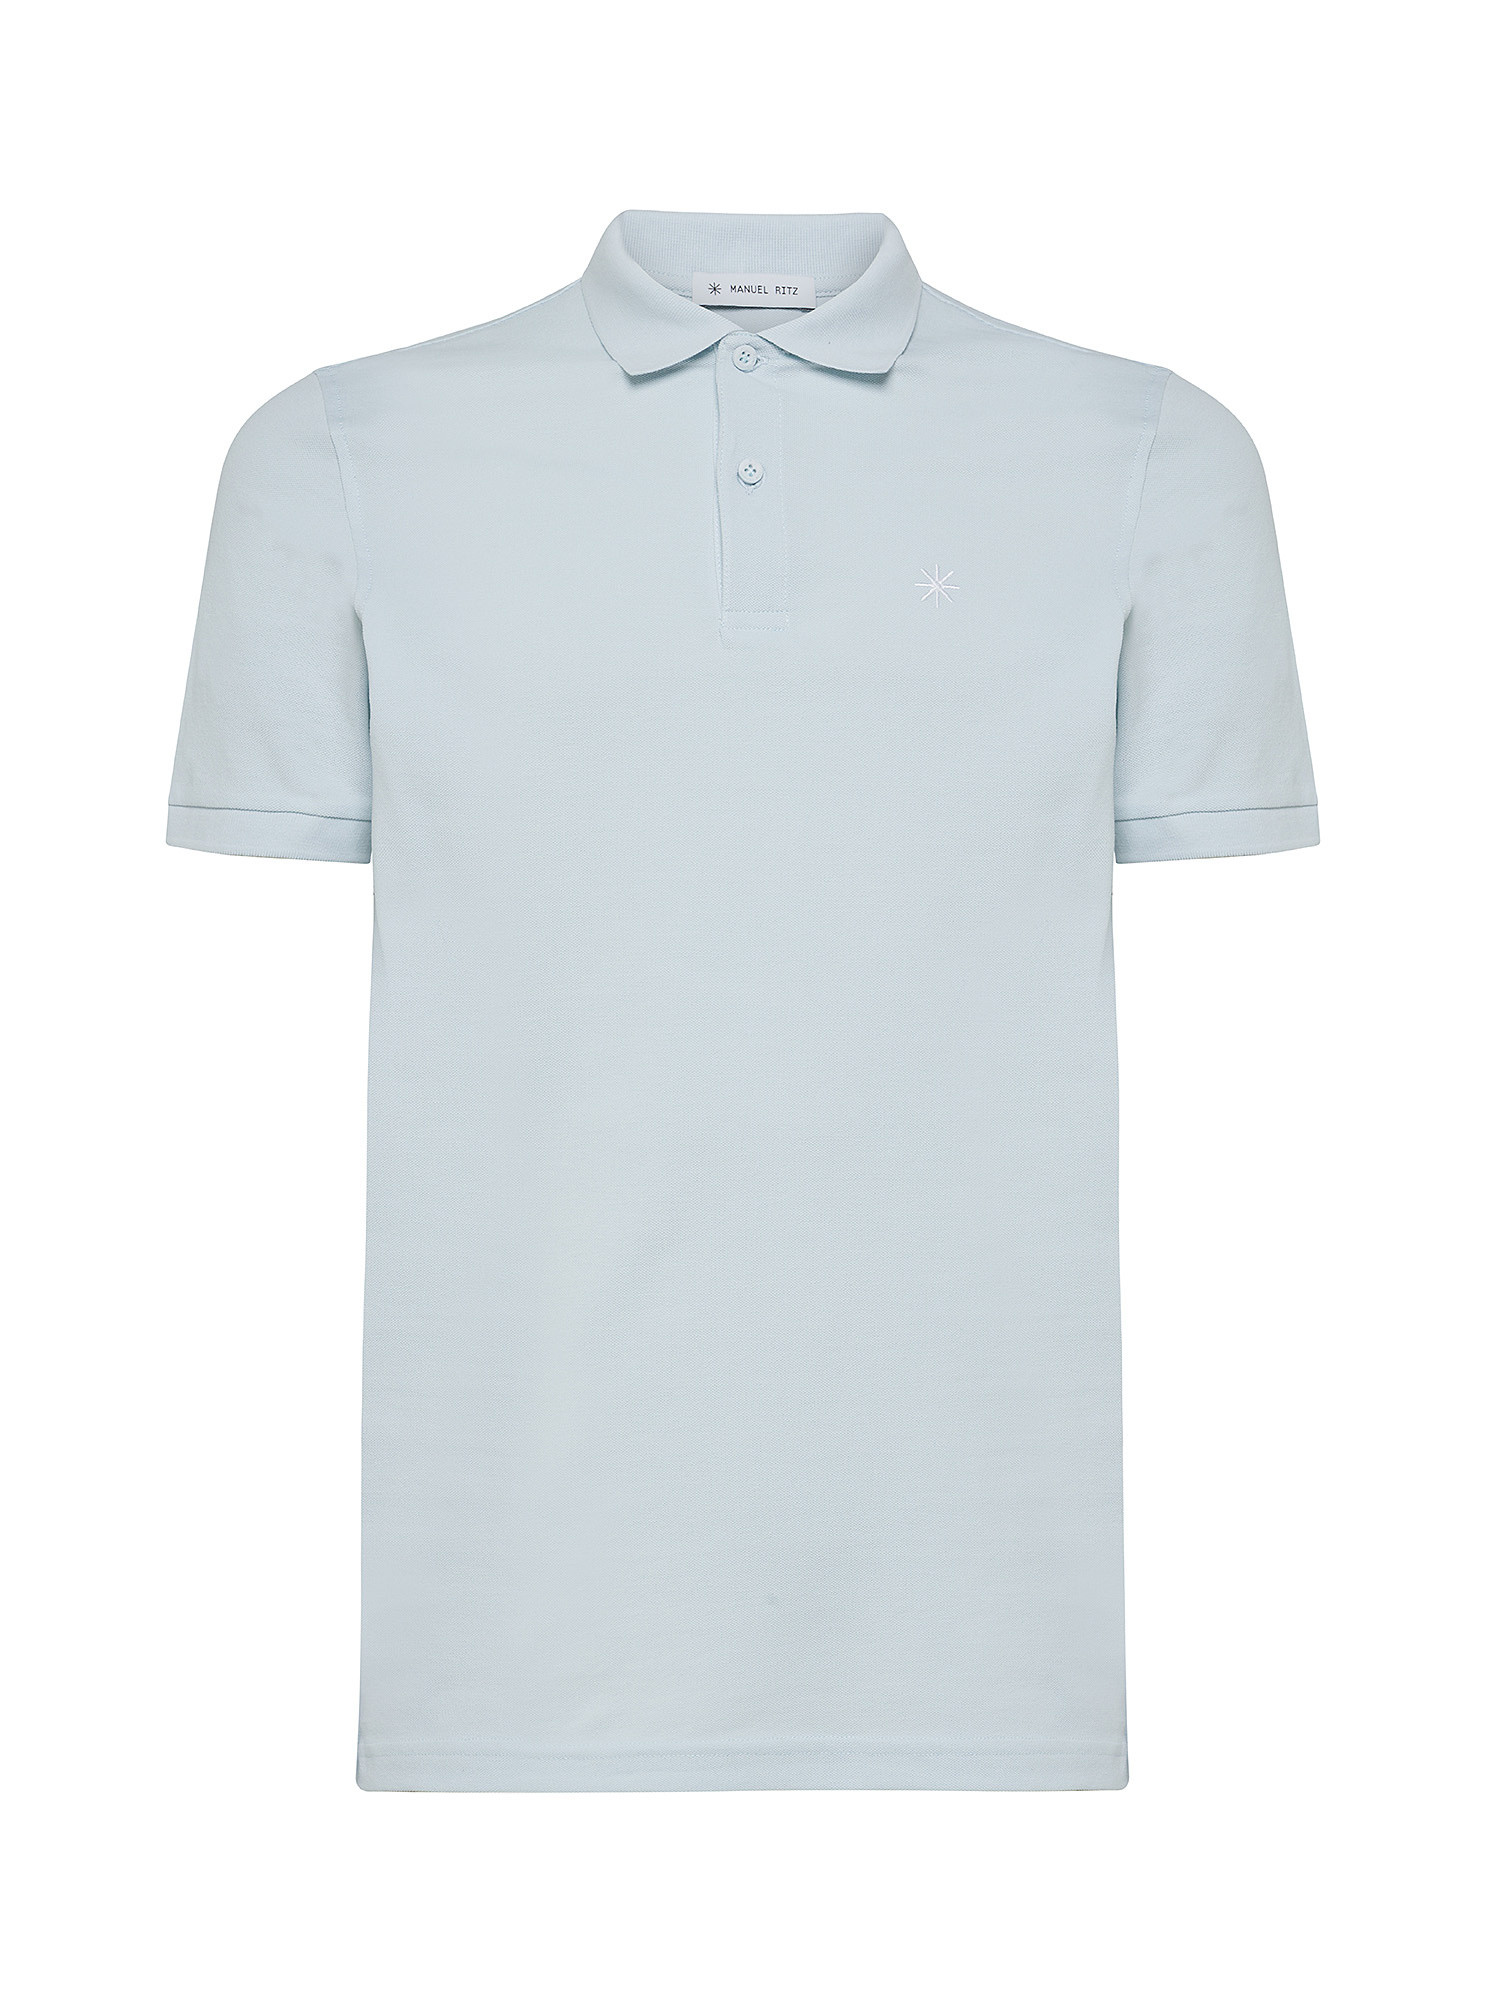 Manuel Ritz - Polo with contrasting embroidered logo, Light Blue, large image number 0